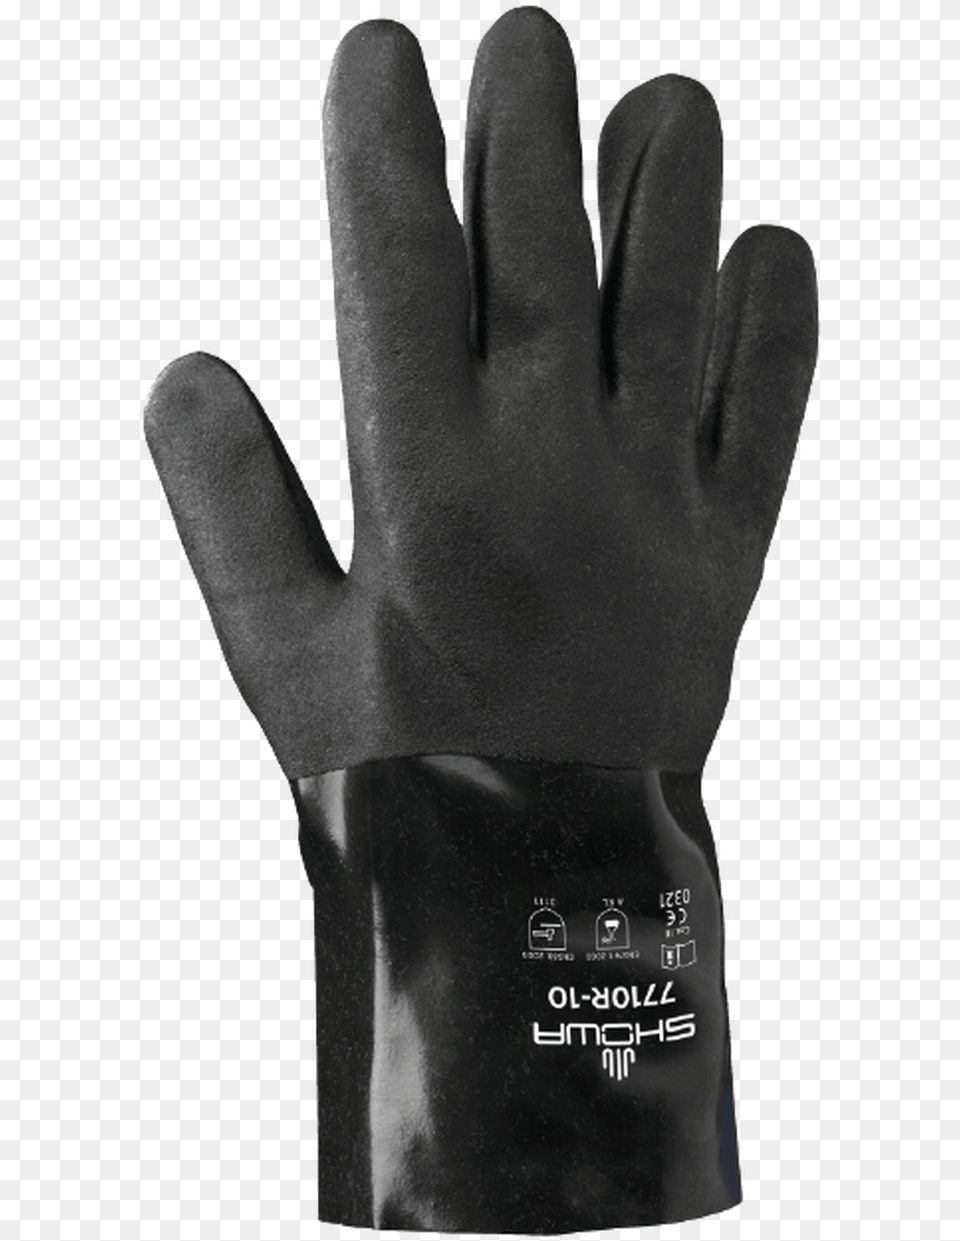 Showa 7710r 10 Black Knight Chemical Resistant Gloves Leather, Clothing, Glove, Baseball, Baseball Glove Png